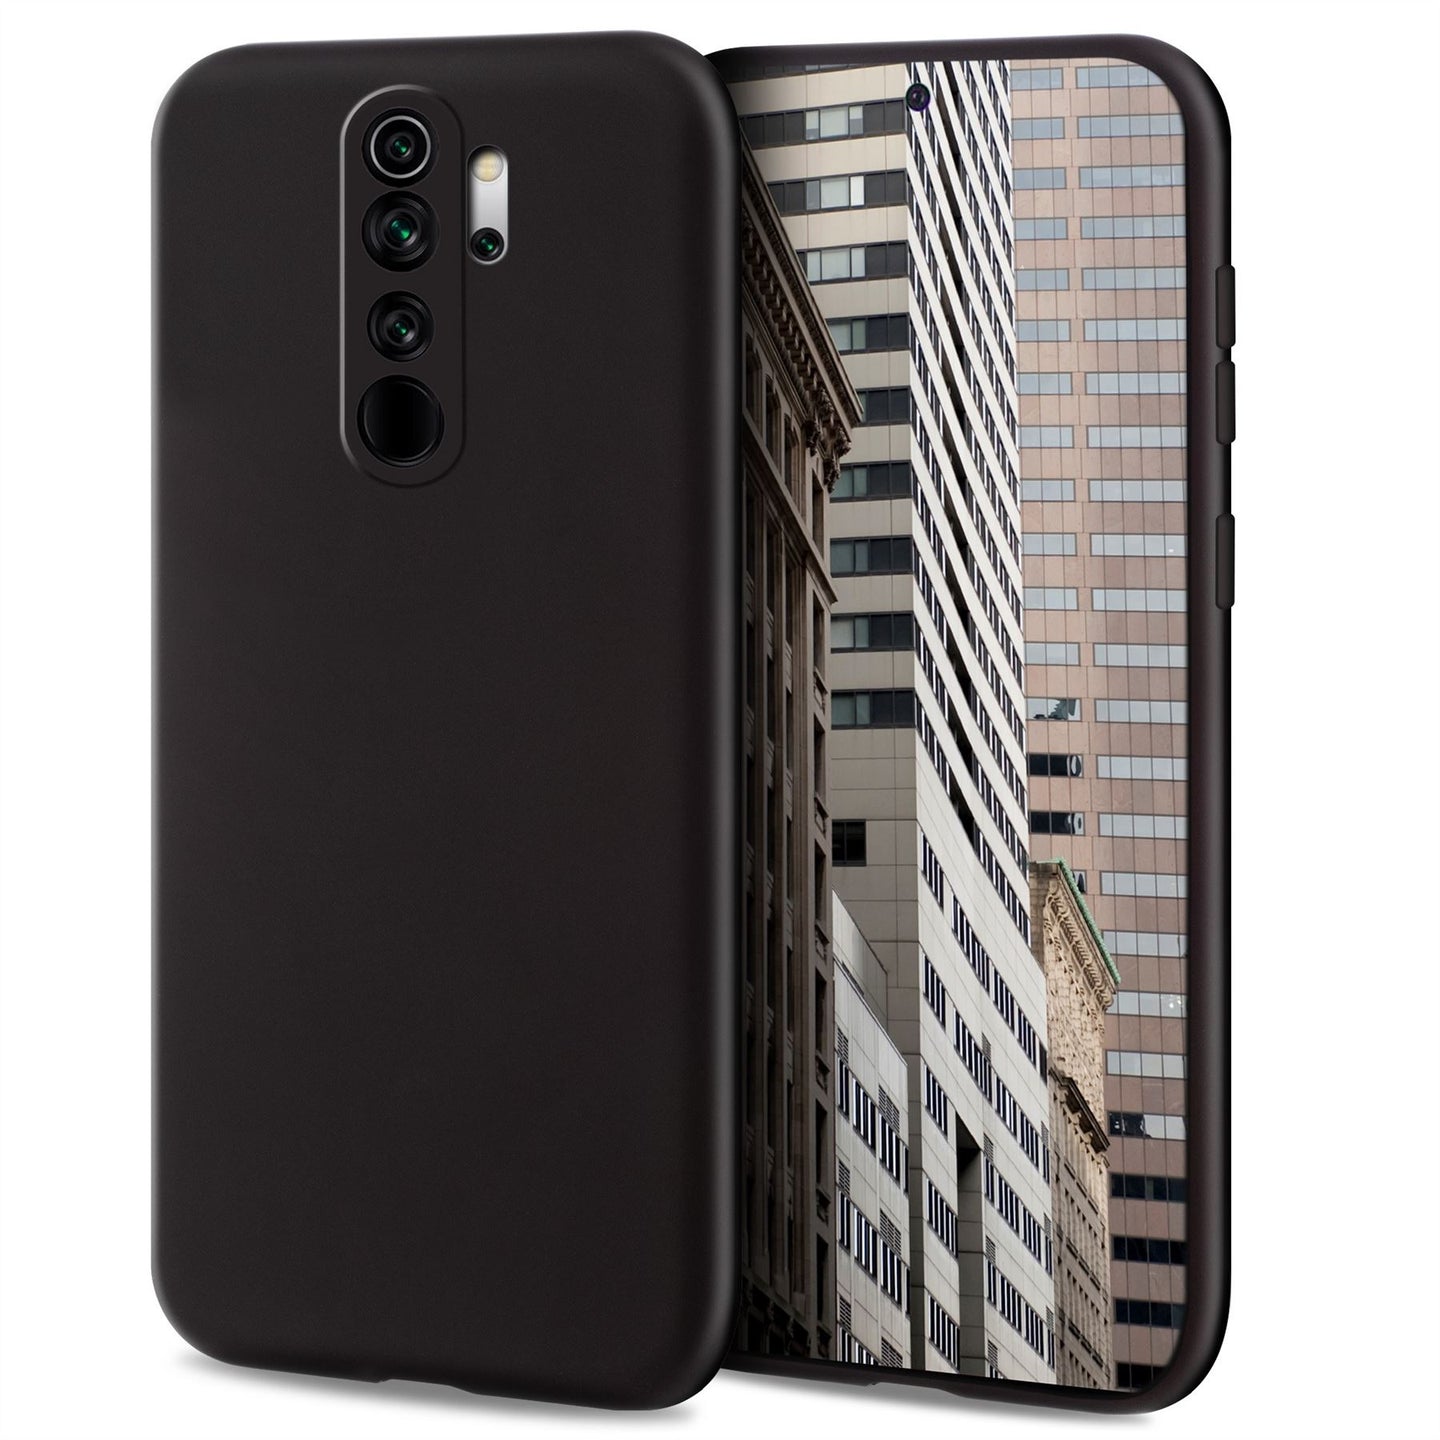 Moozy Lifestyle. Designed for Xiaomi Redmi Note 8 Pro Case, Black - Liquid Silicone Cover with Matte Finish and Soft Microfiber Lining